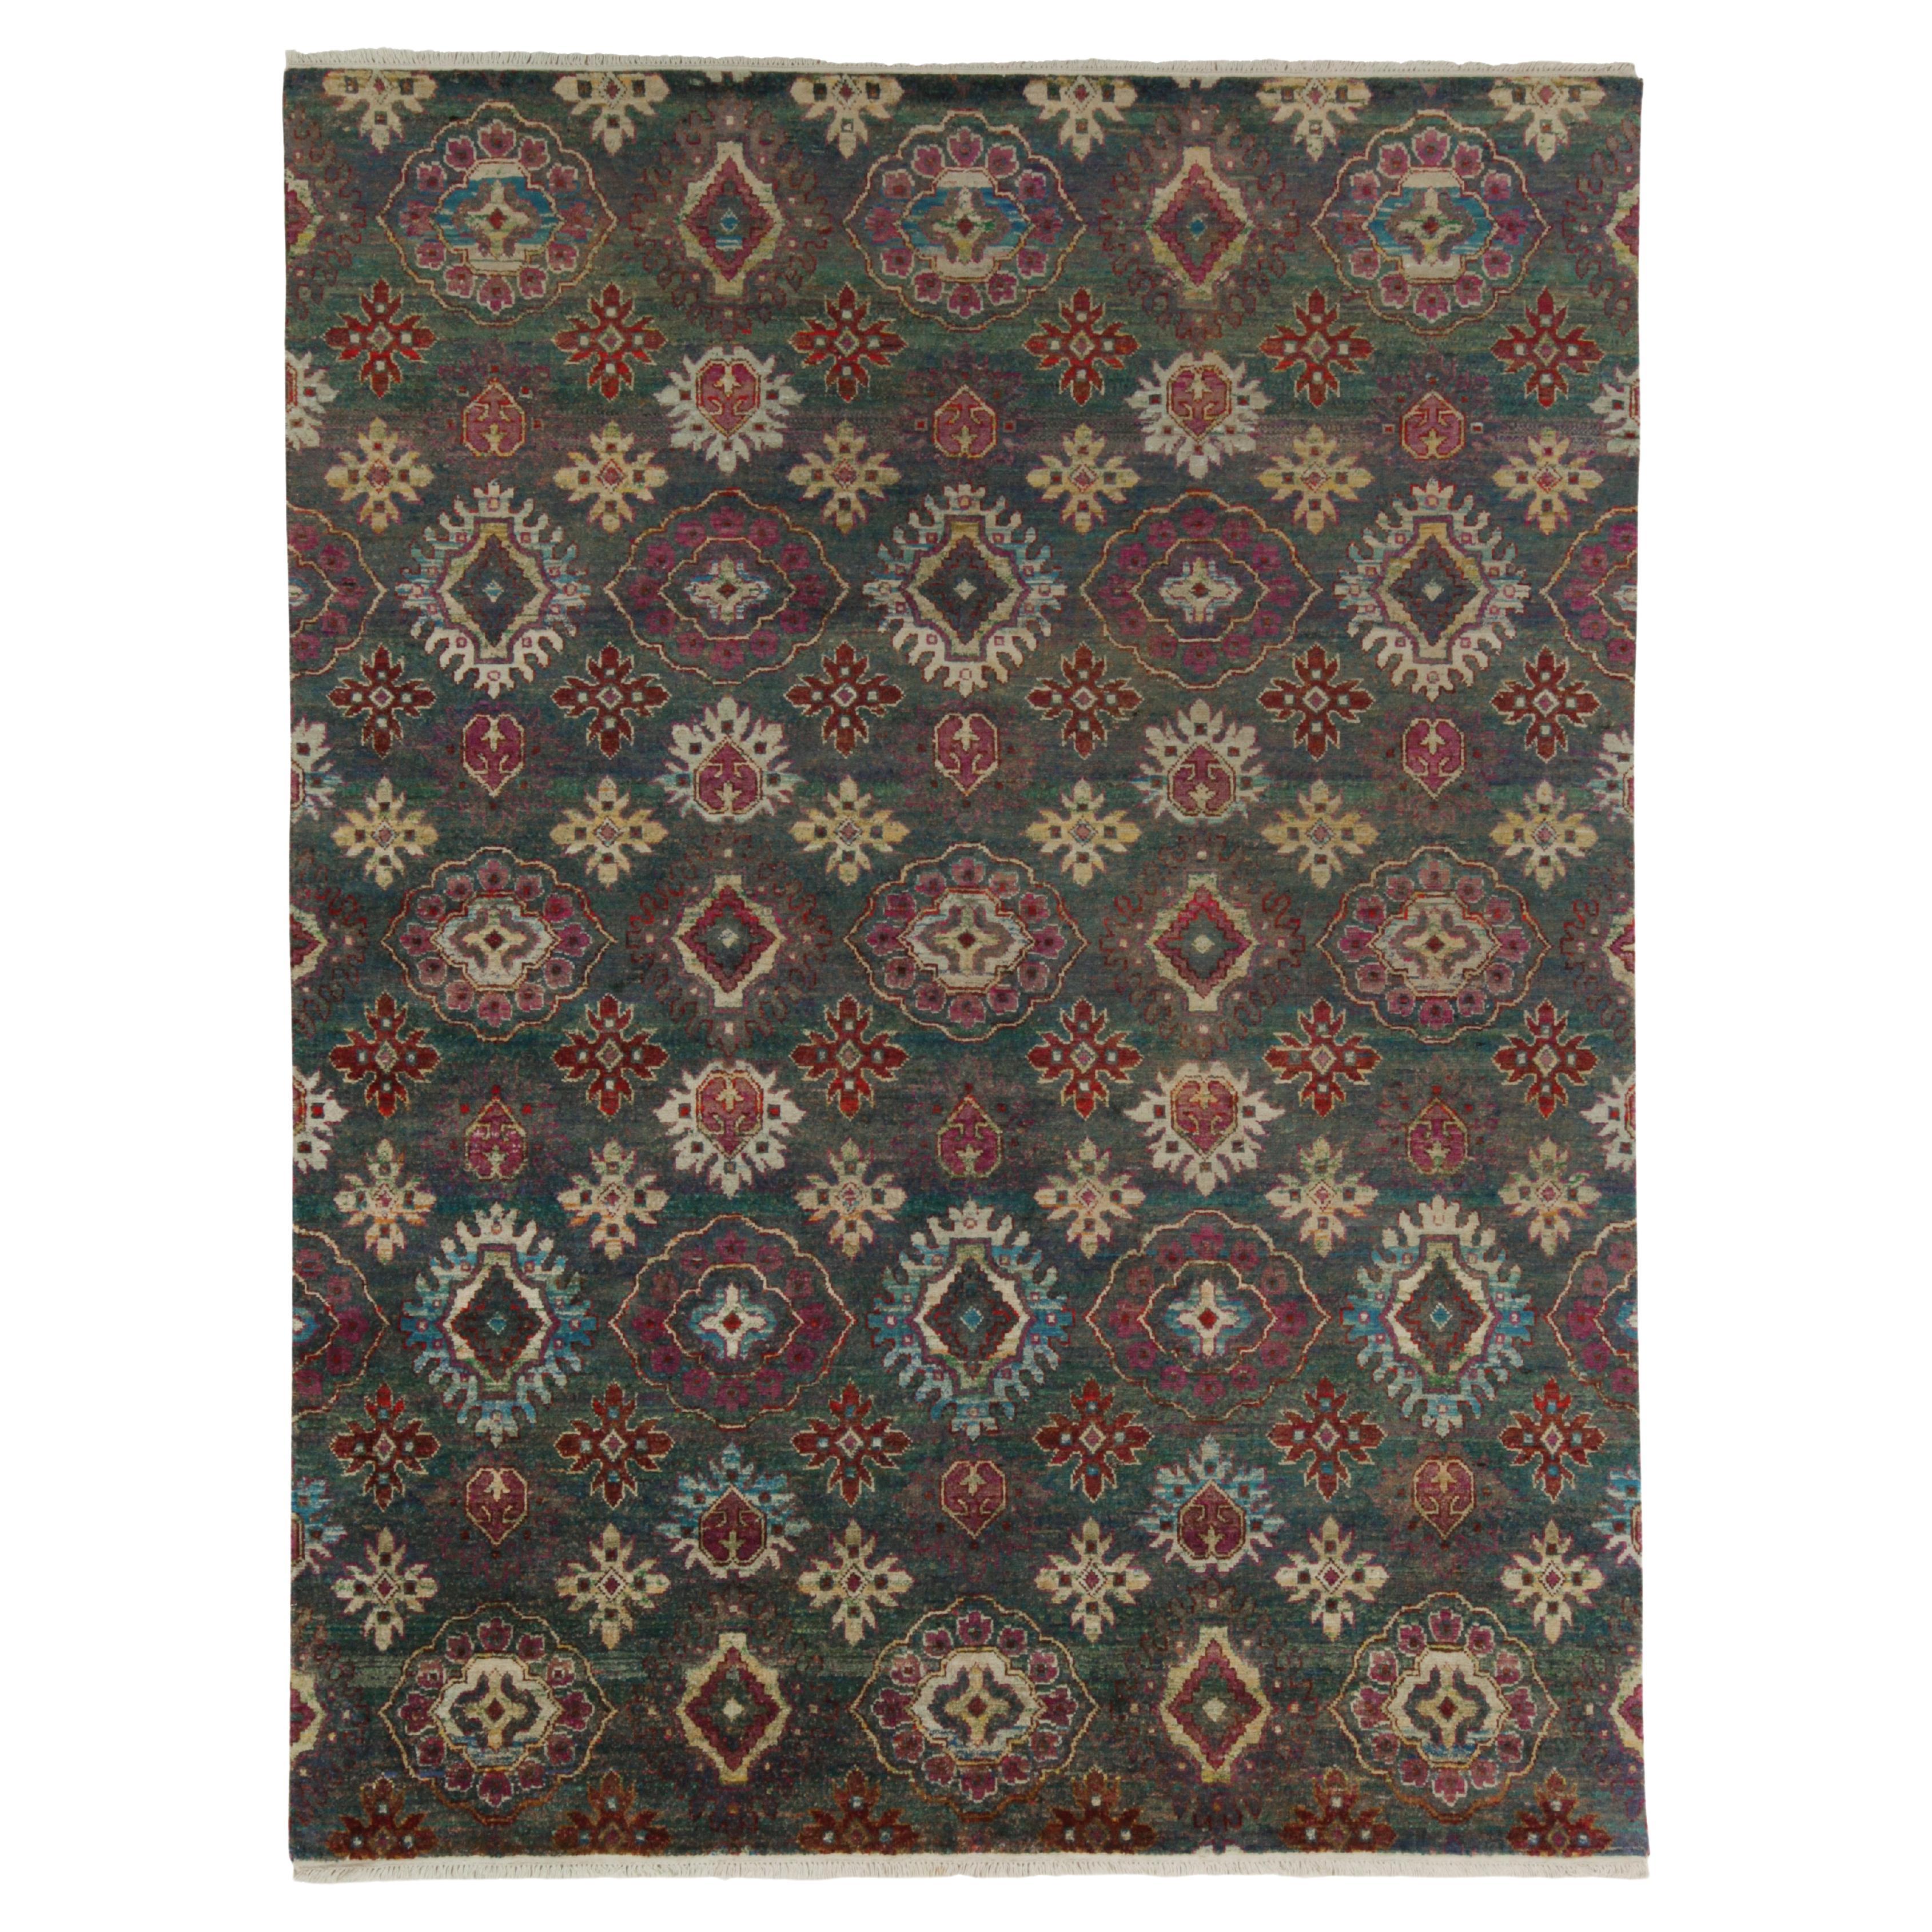 Rug & Kilim’s Classic Style Rug in Green with Beige and Red Ikats Medallions